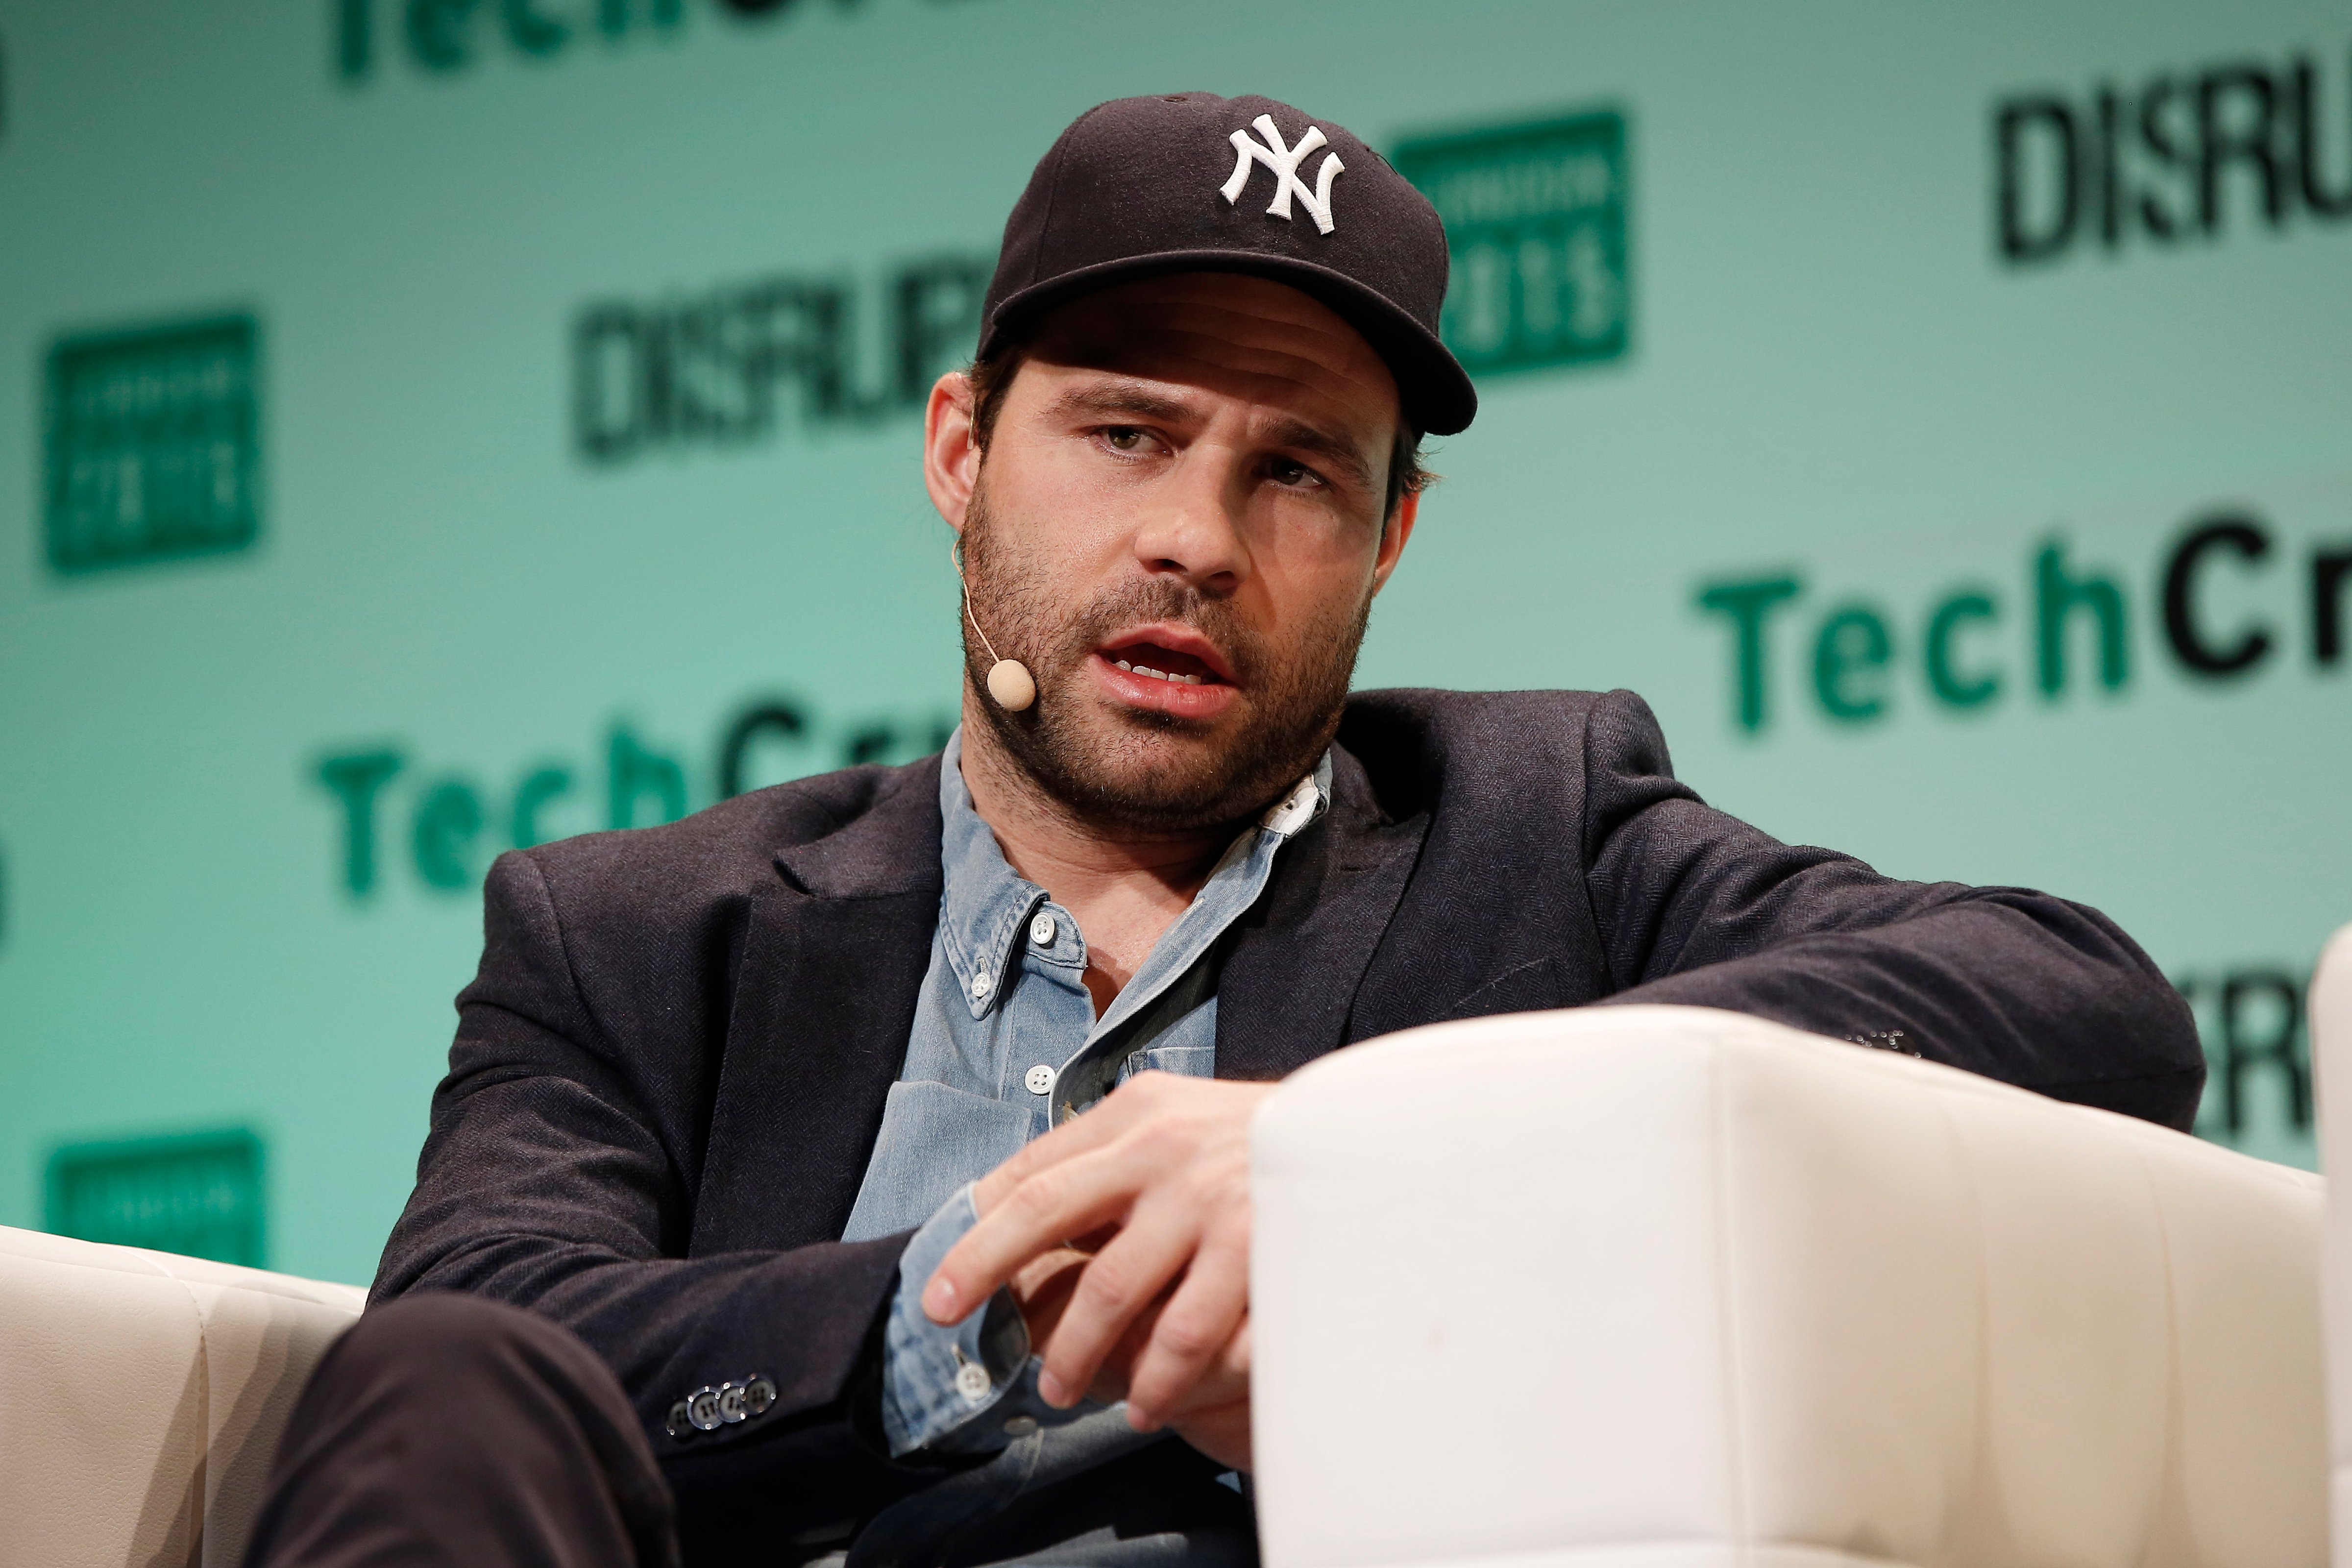 Founder &amp; CEO at Postmates Bastian Lehmann during TechCrunch Disrupt London 2015 - Day 1 at Copper Box Arena on December 7, 2015 in London, England. (John Phillips&mdash;Getty Images for TechCrunch)